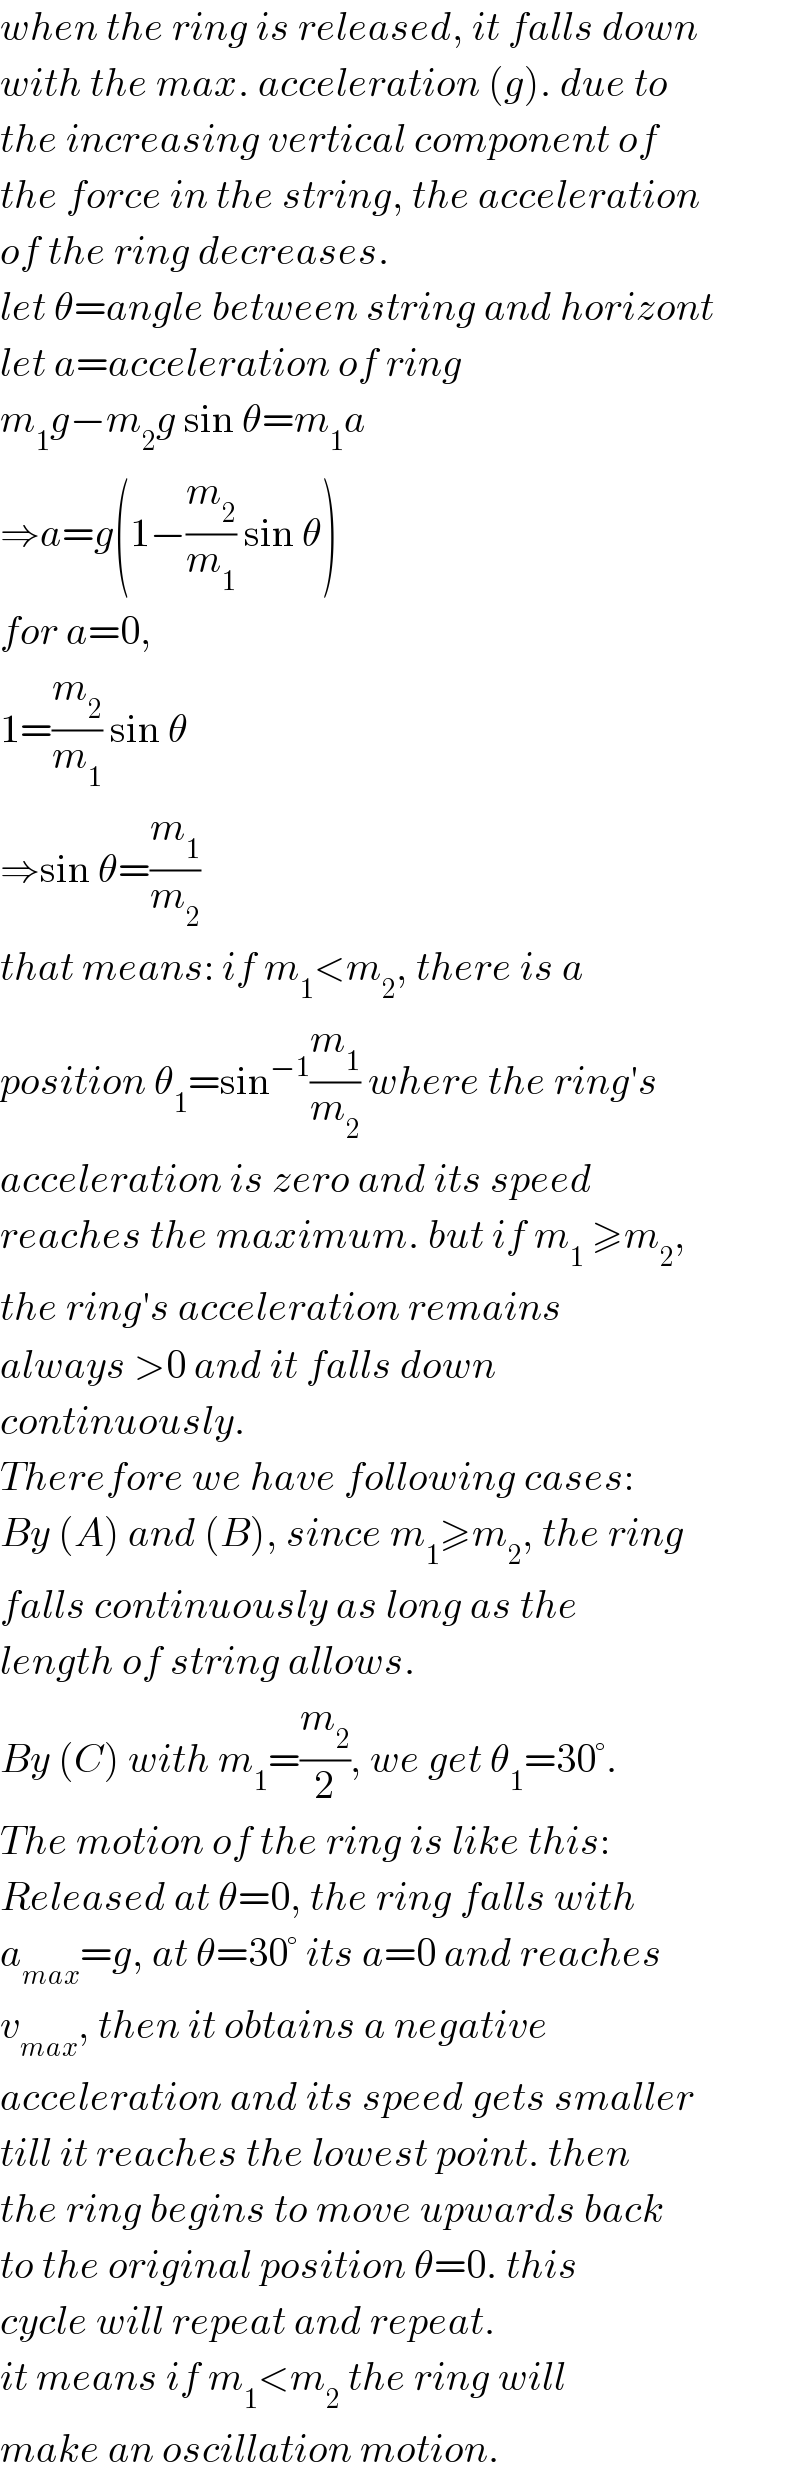 when the ring is released, it falls down  with the max. acceleration (g). due to  the increasing vertical component of  the force in the string, the acceleration  of the ring decreases.   let θ=angle between string and horizont  let a=acceleration of ring  m_1 g−m_2 g sin θ=m_1 a  ⇒a=g(1−(m_2 /m_1 ) sin θ)  for a=0,  1=(m_2 /m_1 ) sin θ  ⇒sin θ=(m_1 /m_2 )  that means: if m_1 <m_2 , there is a  position θ_1 =sin^(−1) (m_1 /m_2 ) where the ring′s  acceleration is zero and its speed  reaches the maximum. but if m_1  ≥m_2 ,  the ring′s acceleration remains  always >0 and it falls down   continuously.  Therefore we have following cases:  By (A) and (B), since m_1 ≥m_2 , the ring  falls continuously as long as the  length of string allows.  By (C) with m_1 =(m_2 /2), we get θ_1 =30°.  The motion of the ring is like this:  Released at θ=0, the ring falls with  a_(max) =g, at θ=30° its a=0 and reaches  v_(max) , then it obtains a negative   acceleration and its speed gets smaller  till it reaches the lowest point. then  the ring begins to move upwards back  to the original position θ=0. this  cycle will repeat and repeat.  it means if m_1 <m_2  the ring will  make an oscillation motion.  